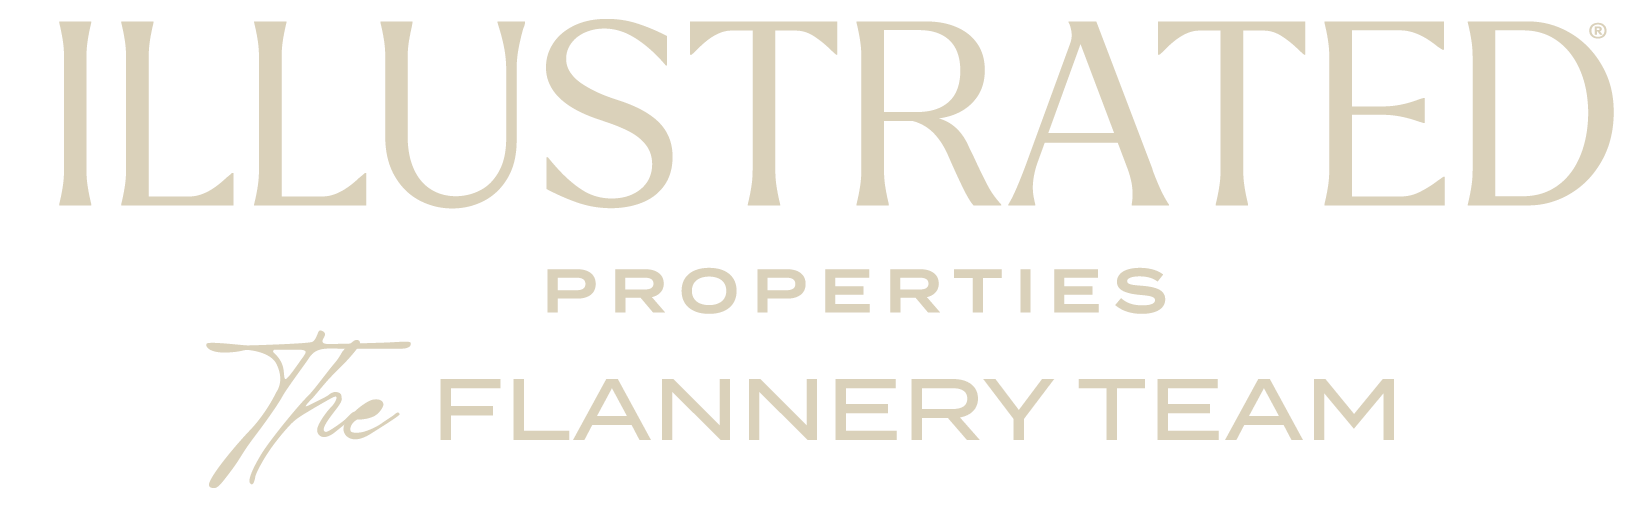 Flannery Team - Illustrated Properties